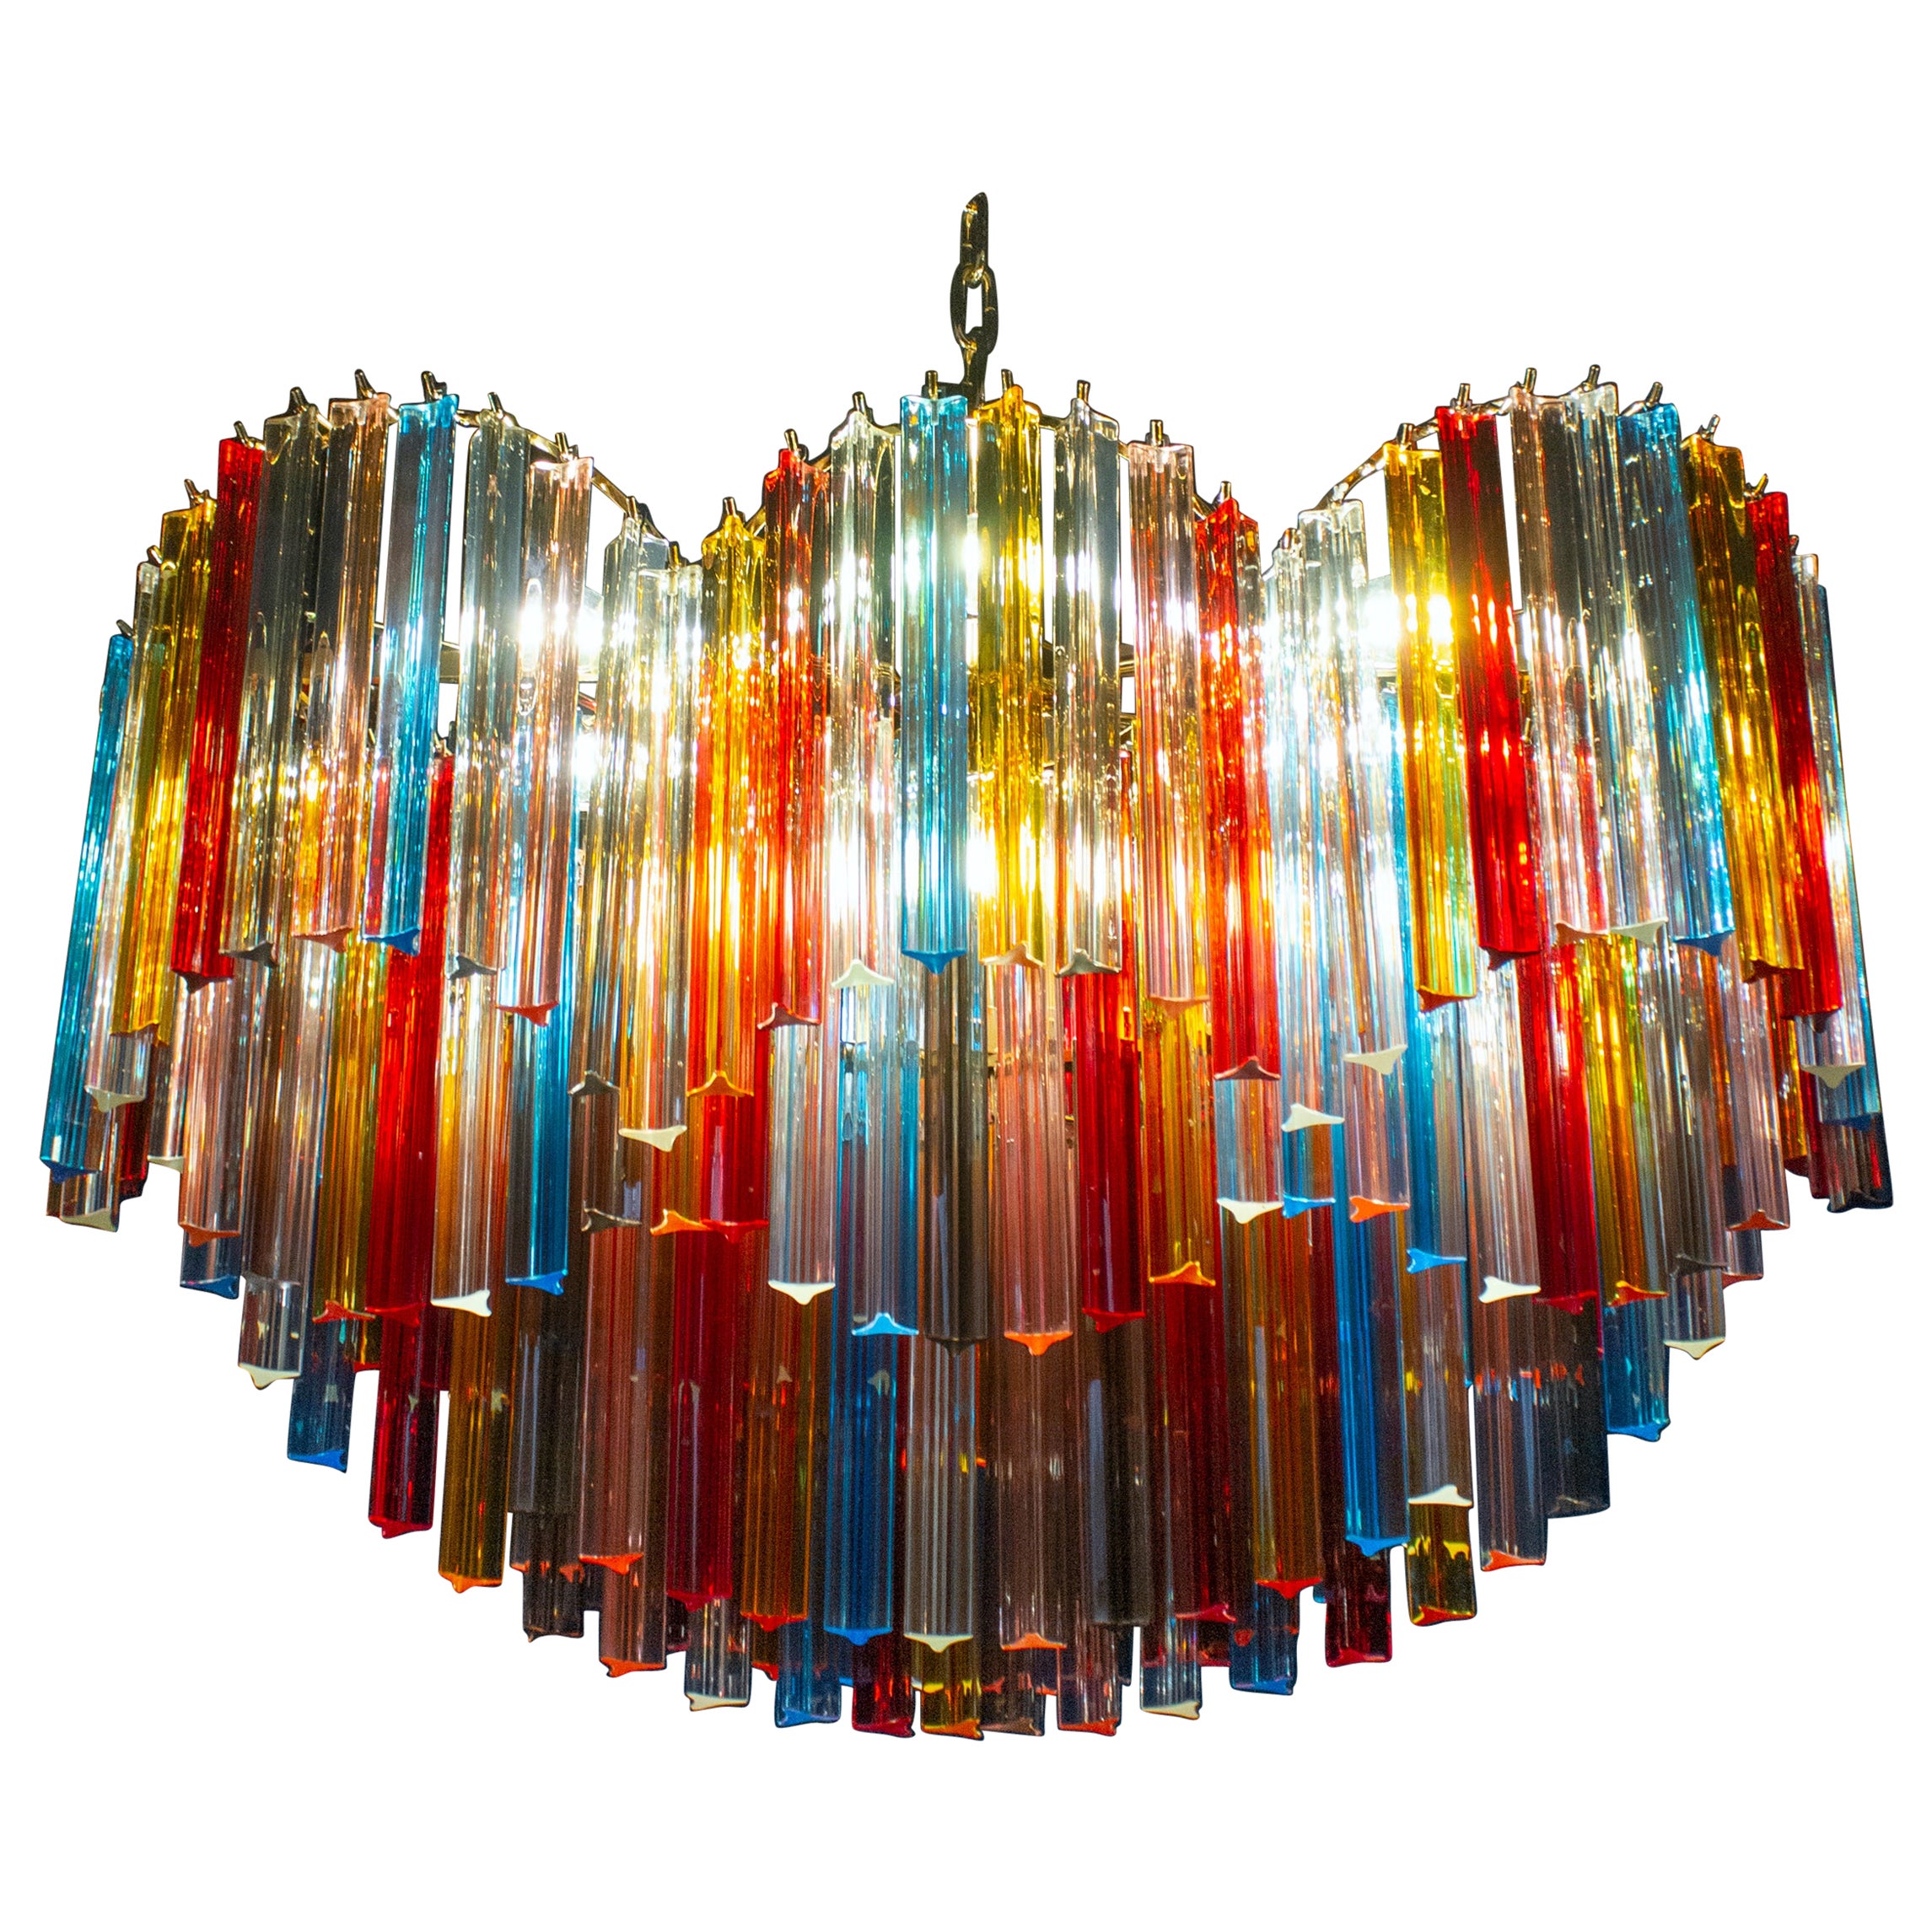 Spectacular Oval Shaped Multi-Color Triedi Murano Glass Chandelier